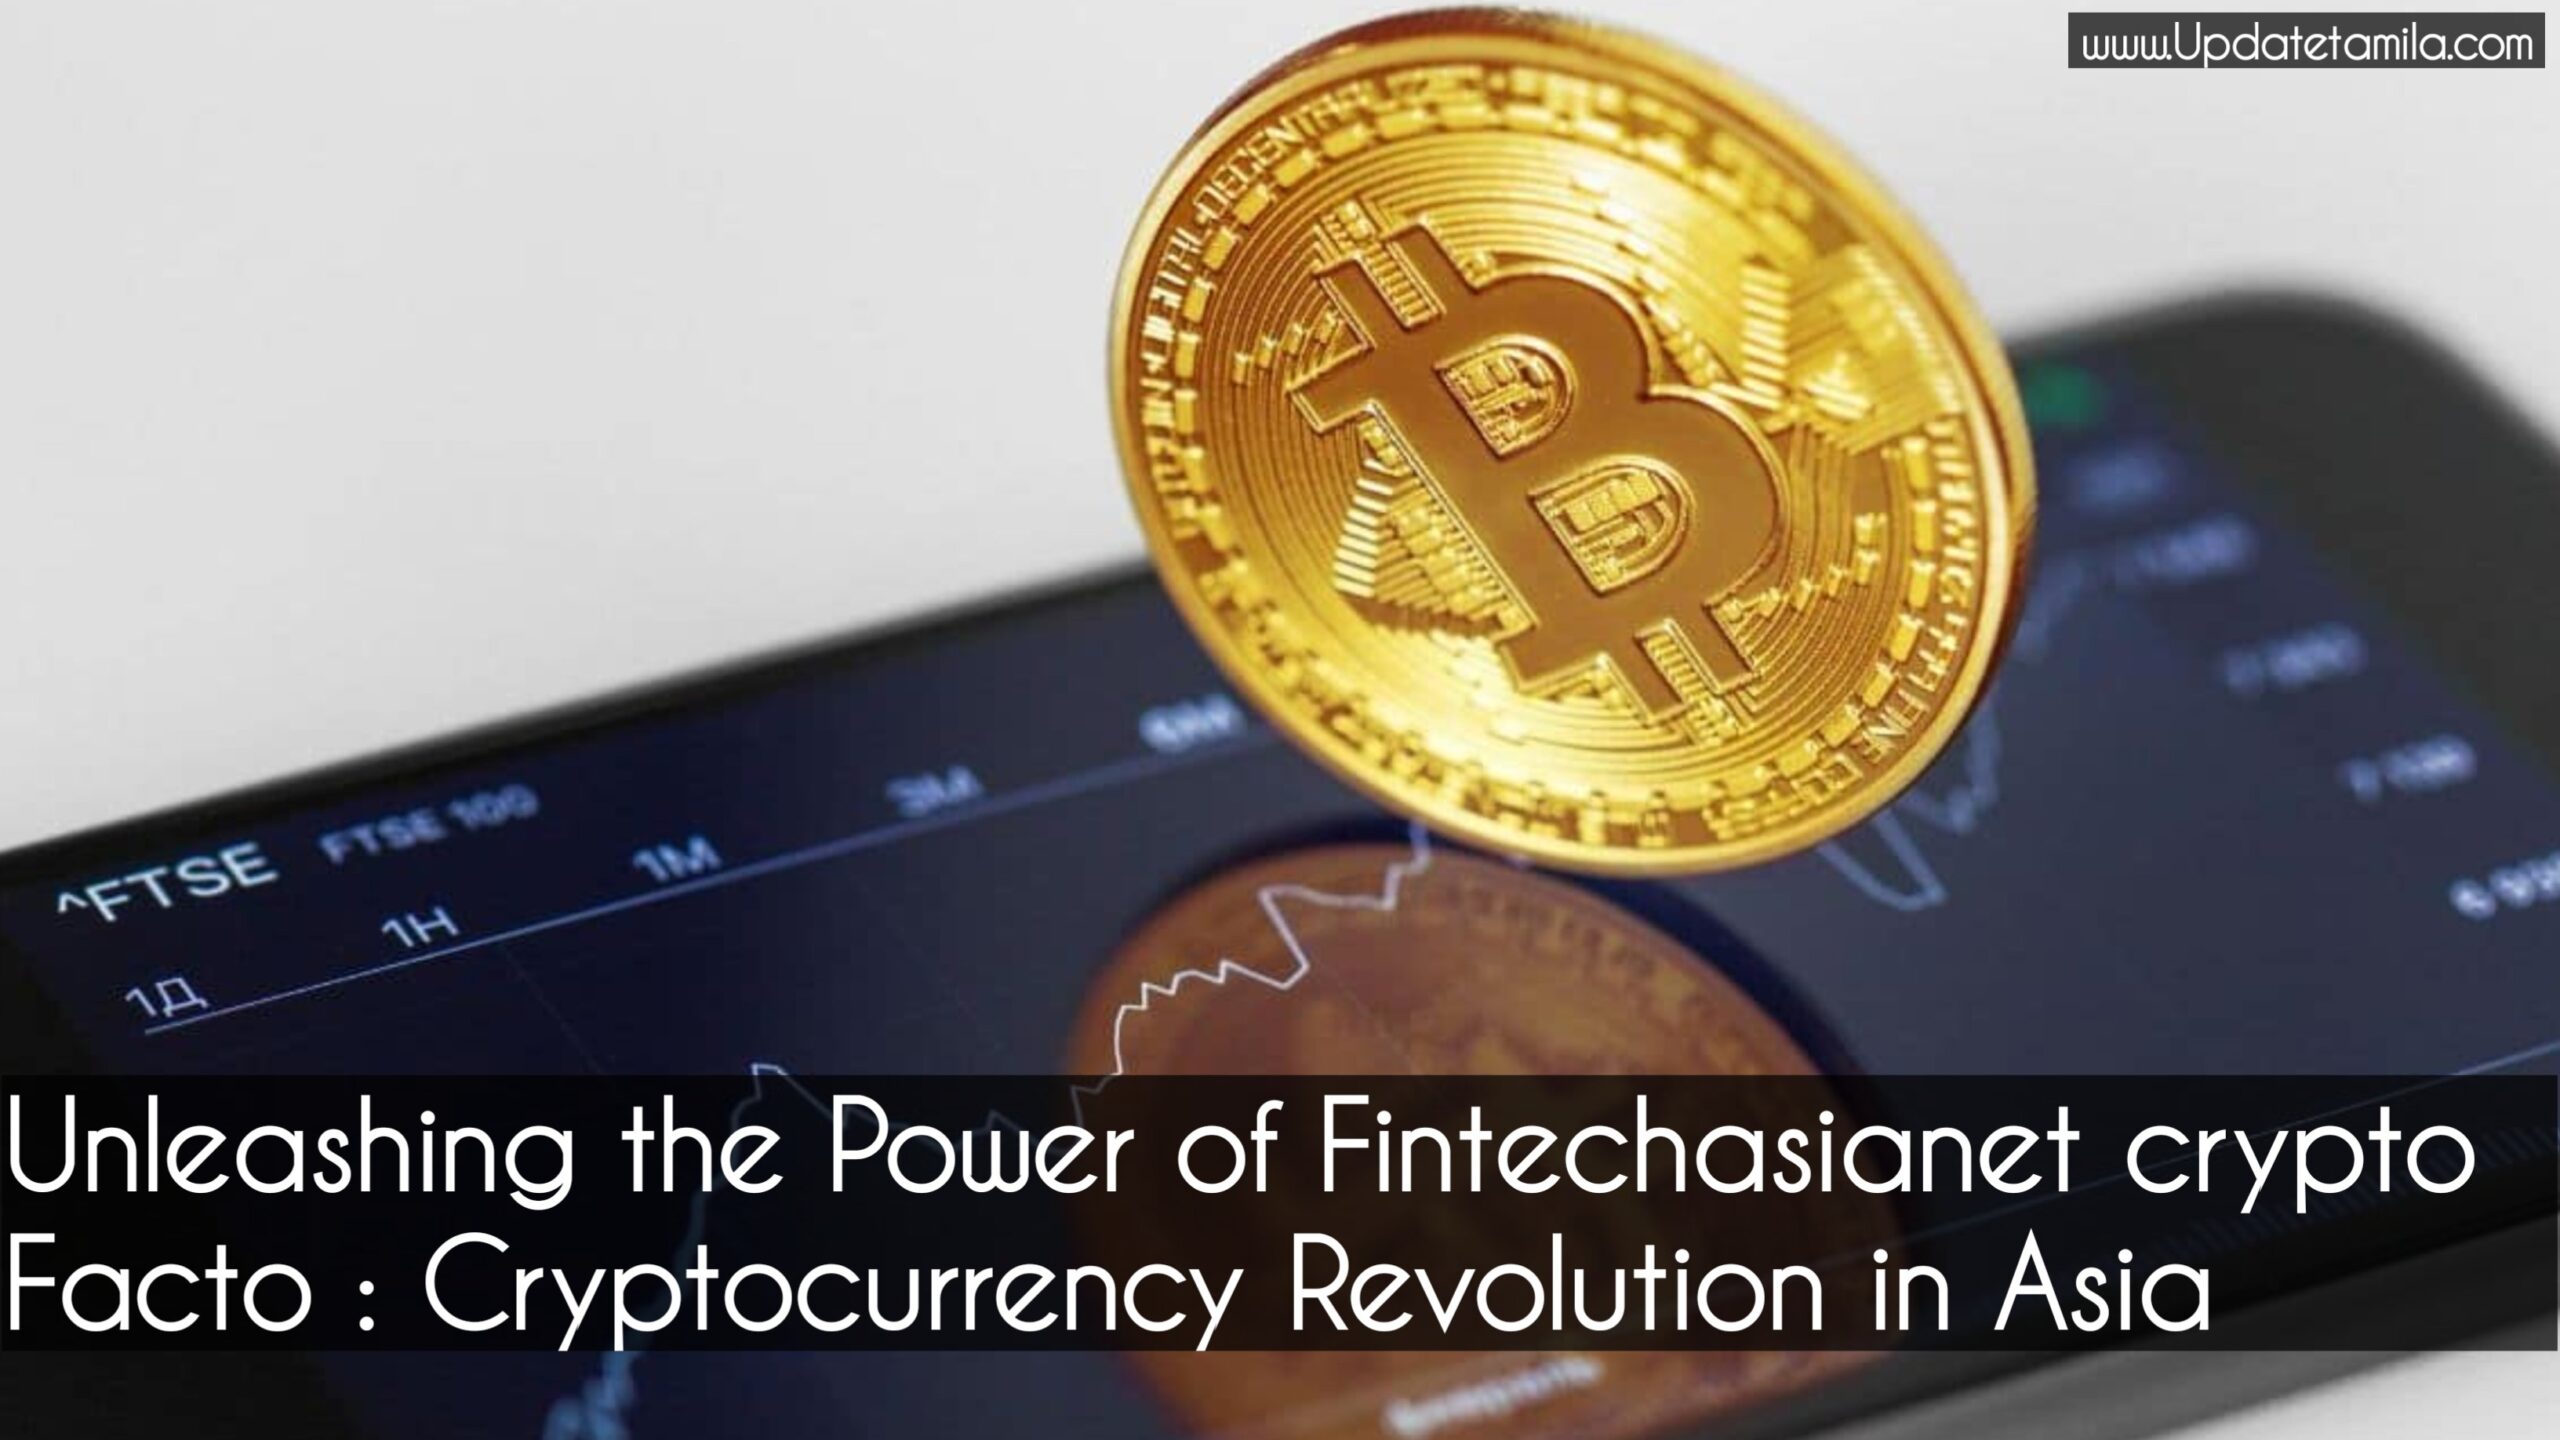 "Unleashing the Power of Fintechasianet crypto facto : Cryptocurrency Revolution in Asia"